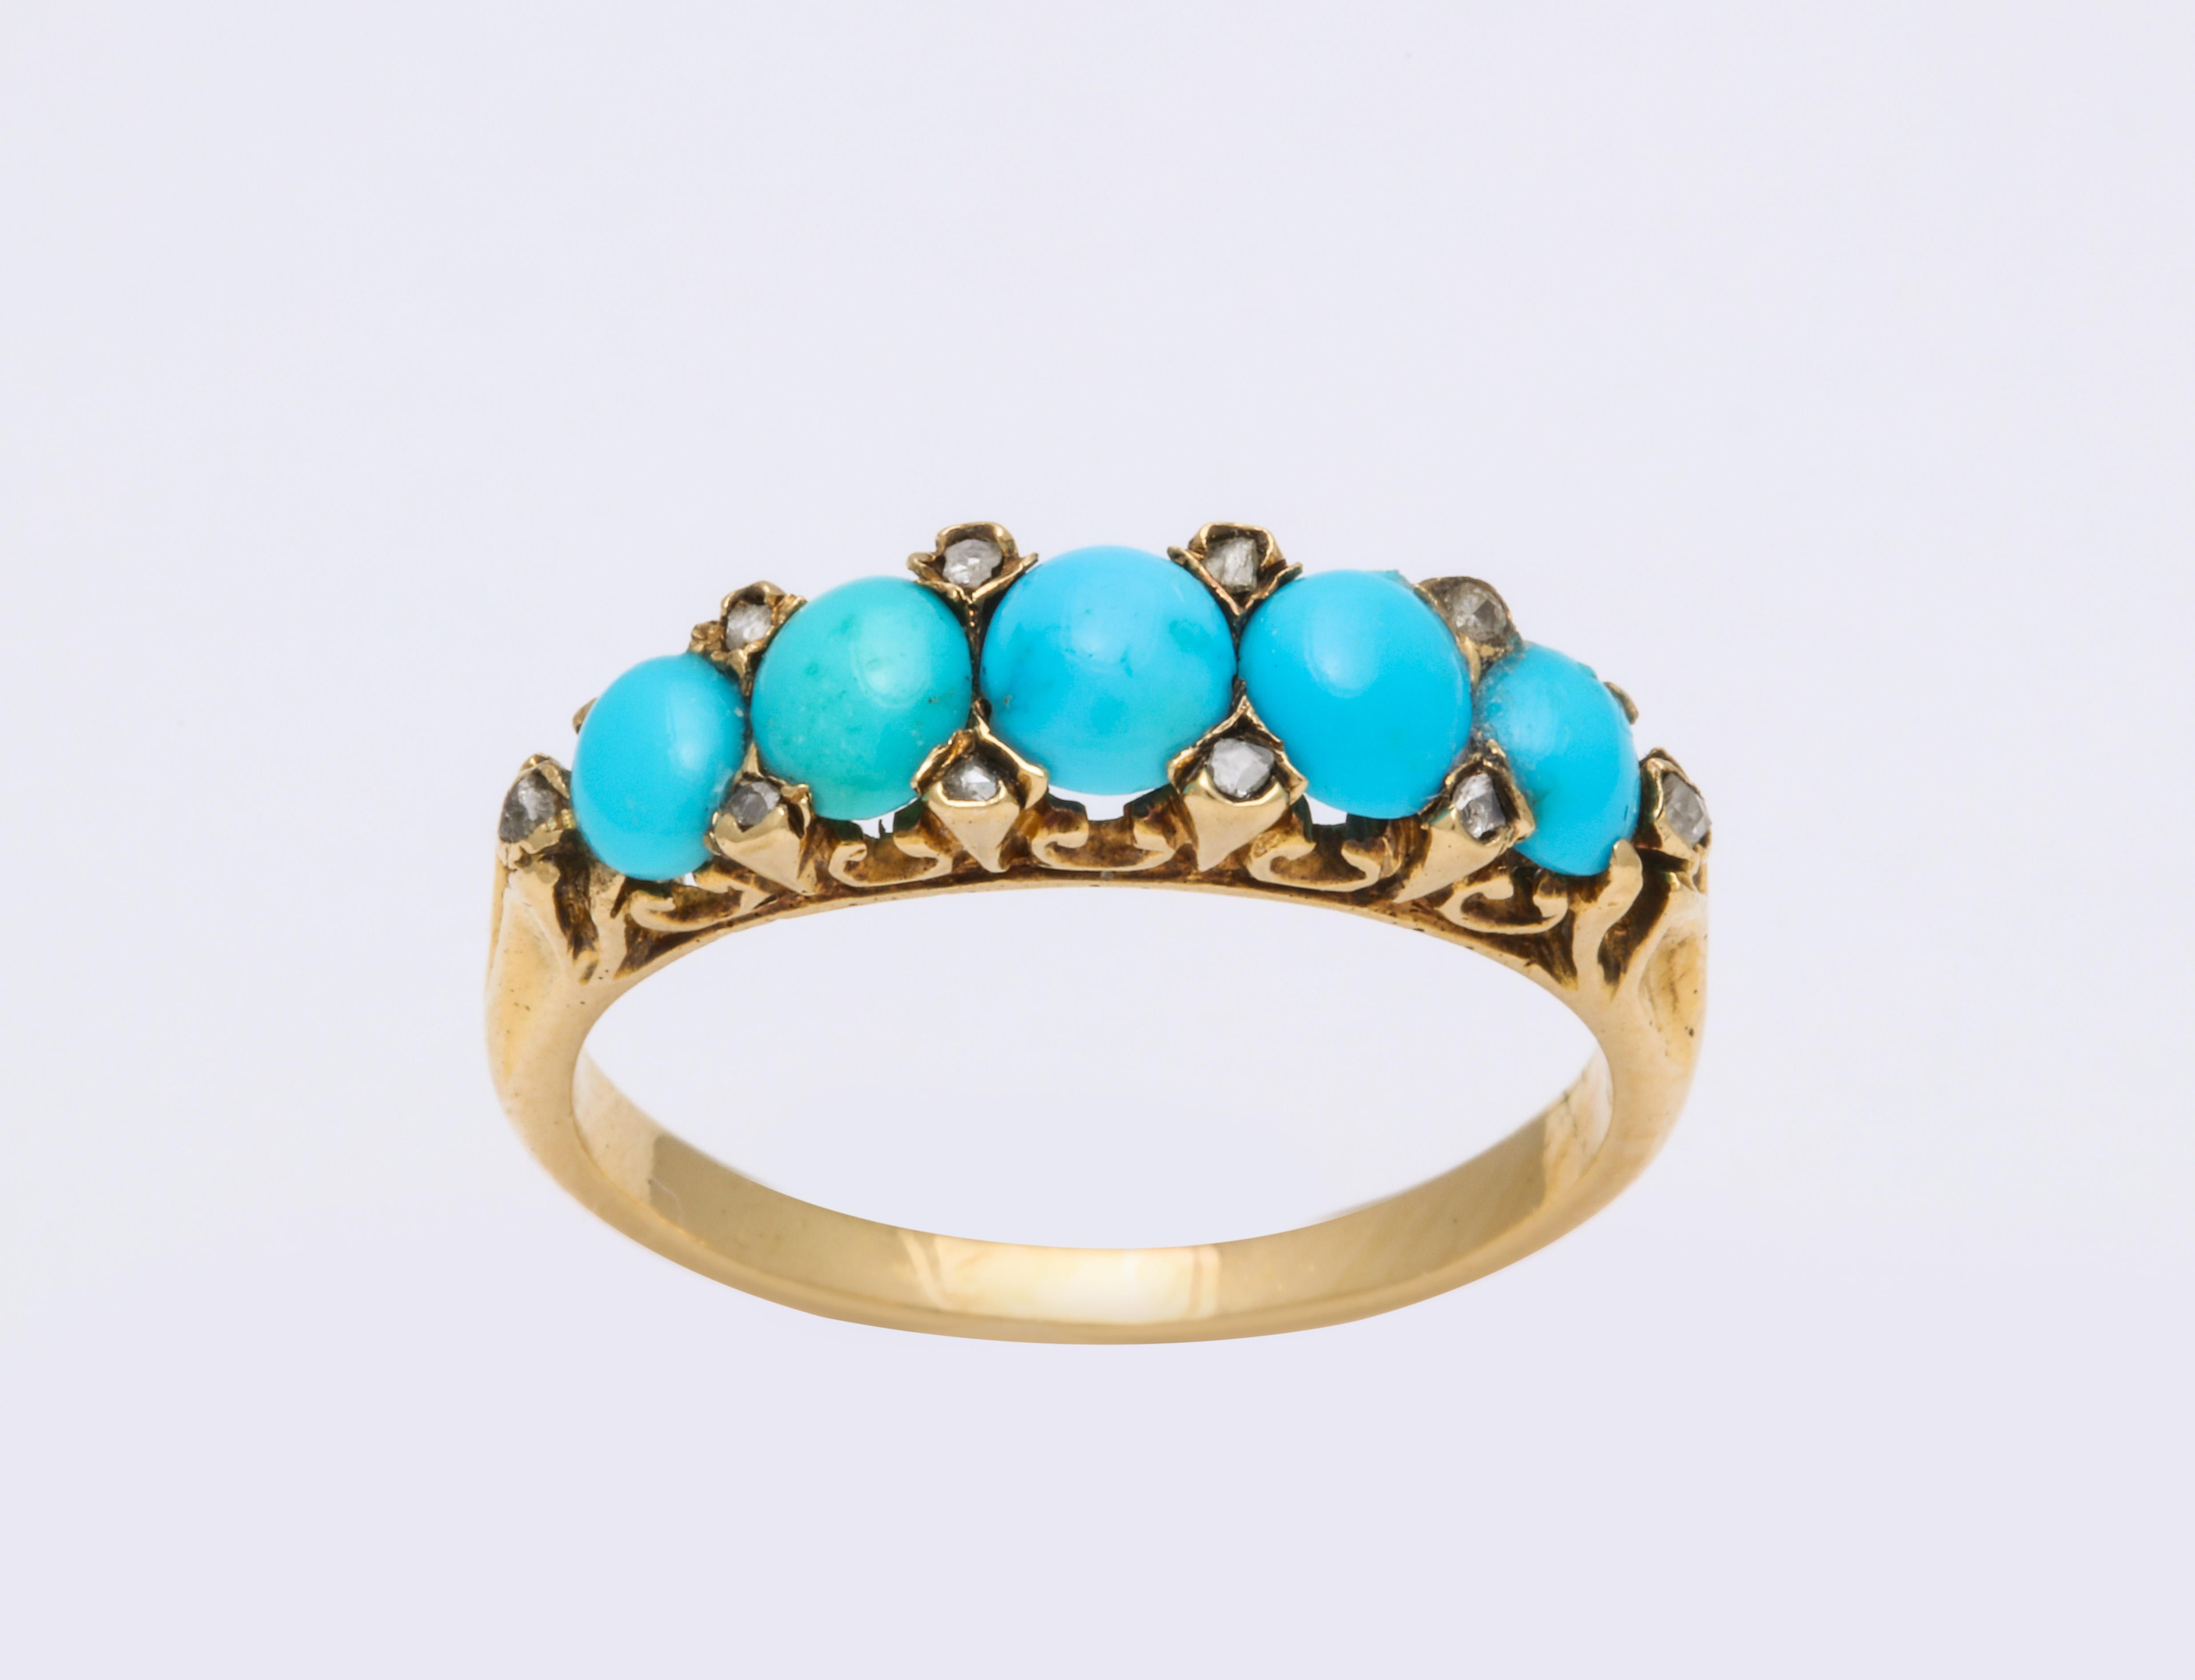 A pristine band of bright, beautifully matched oval turquoise from Persia are sparked by the tiny diamonds interspersed in their lovely architectural 15 kt gold setting. Regardless of theIr small size, the diamonds sparkle in the light and give the